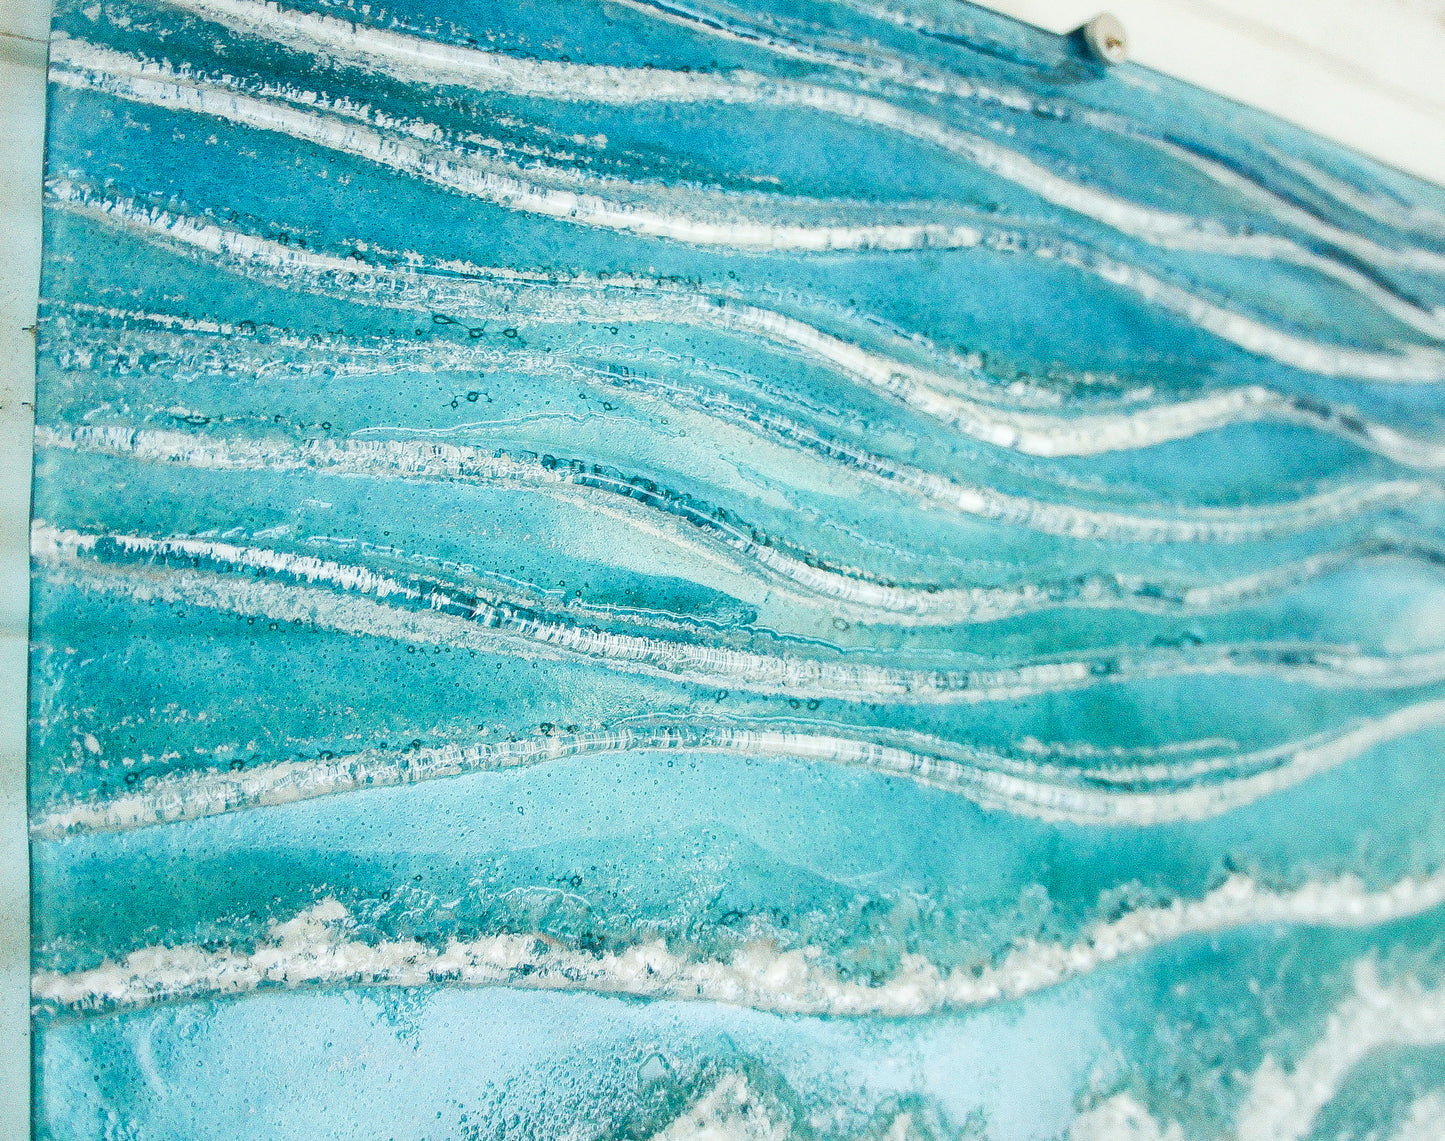 Ocean 60x60cm(23 1/2") - Turquoise Blue Aerial View Ocean Panel Glass Sculpture - Large Fused Glass Ocean Wall Art with 3 wall fixings